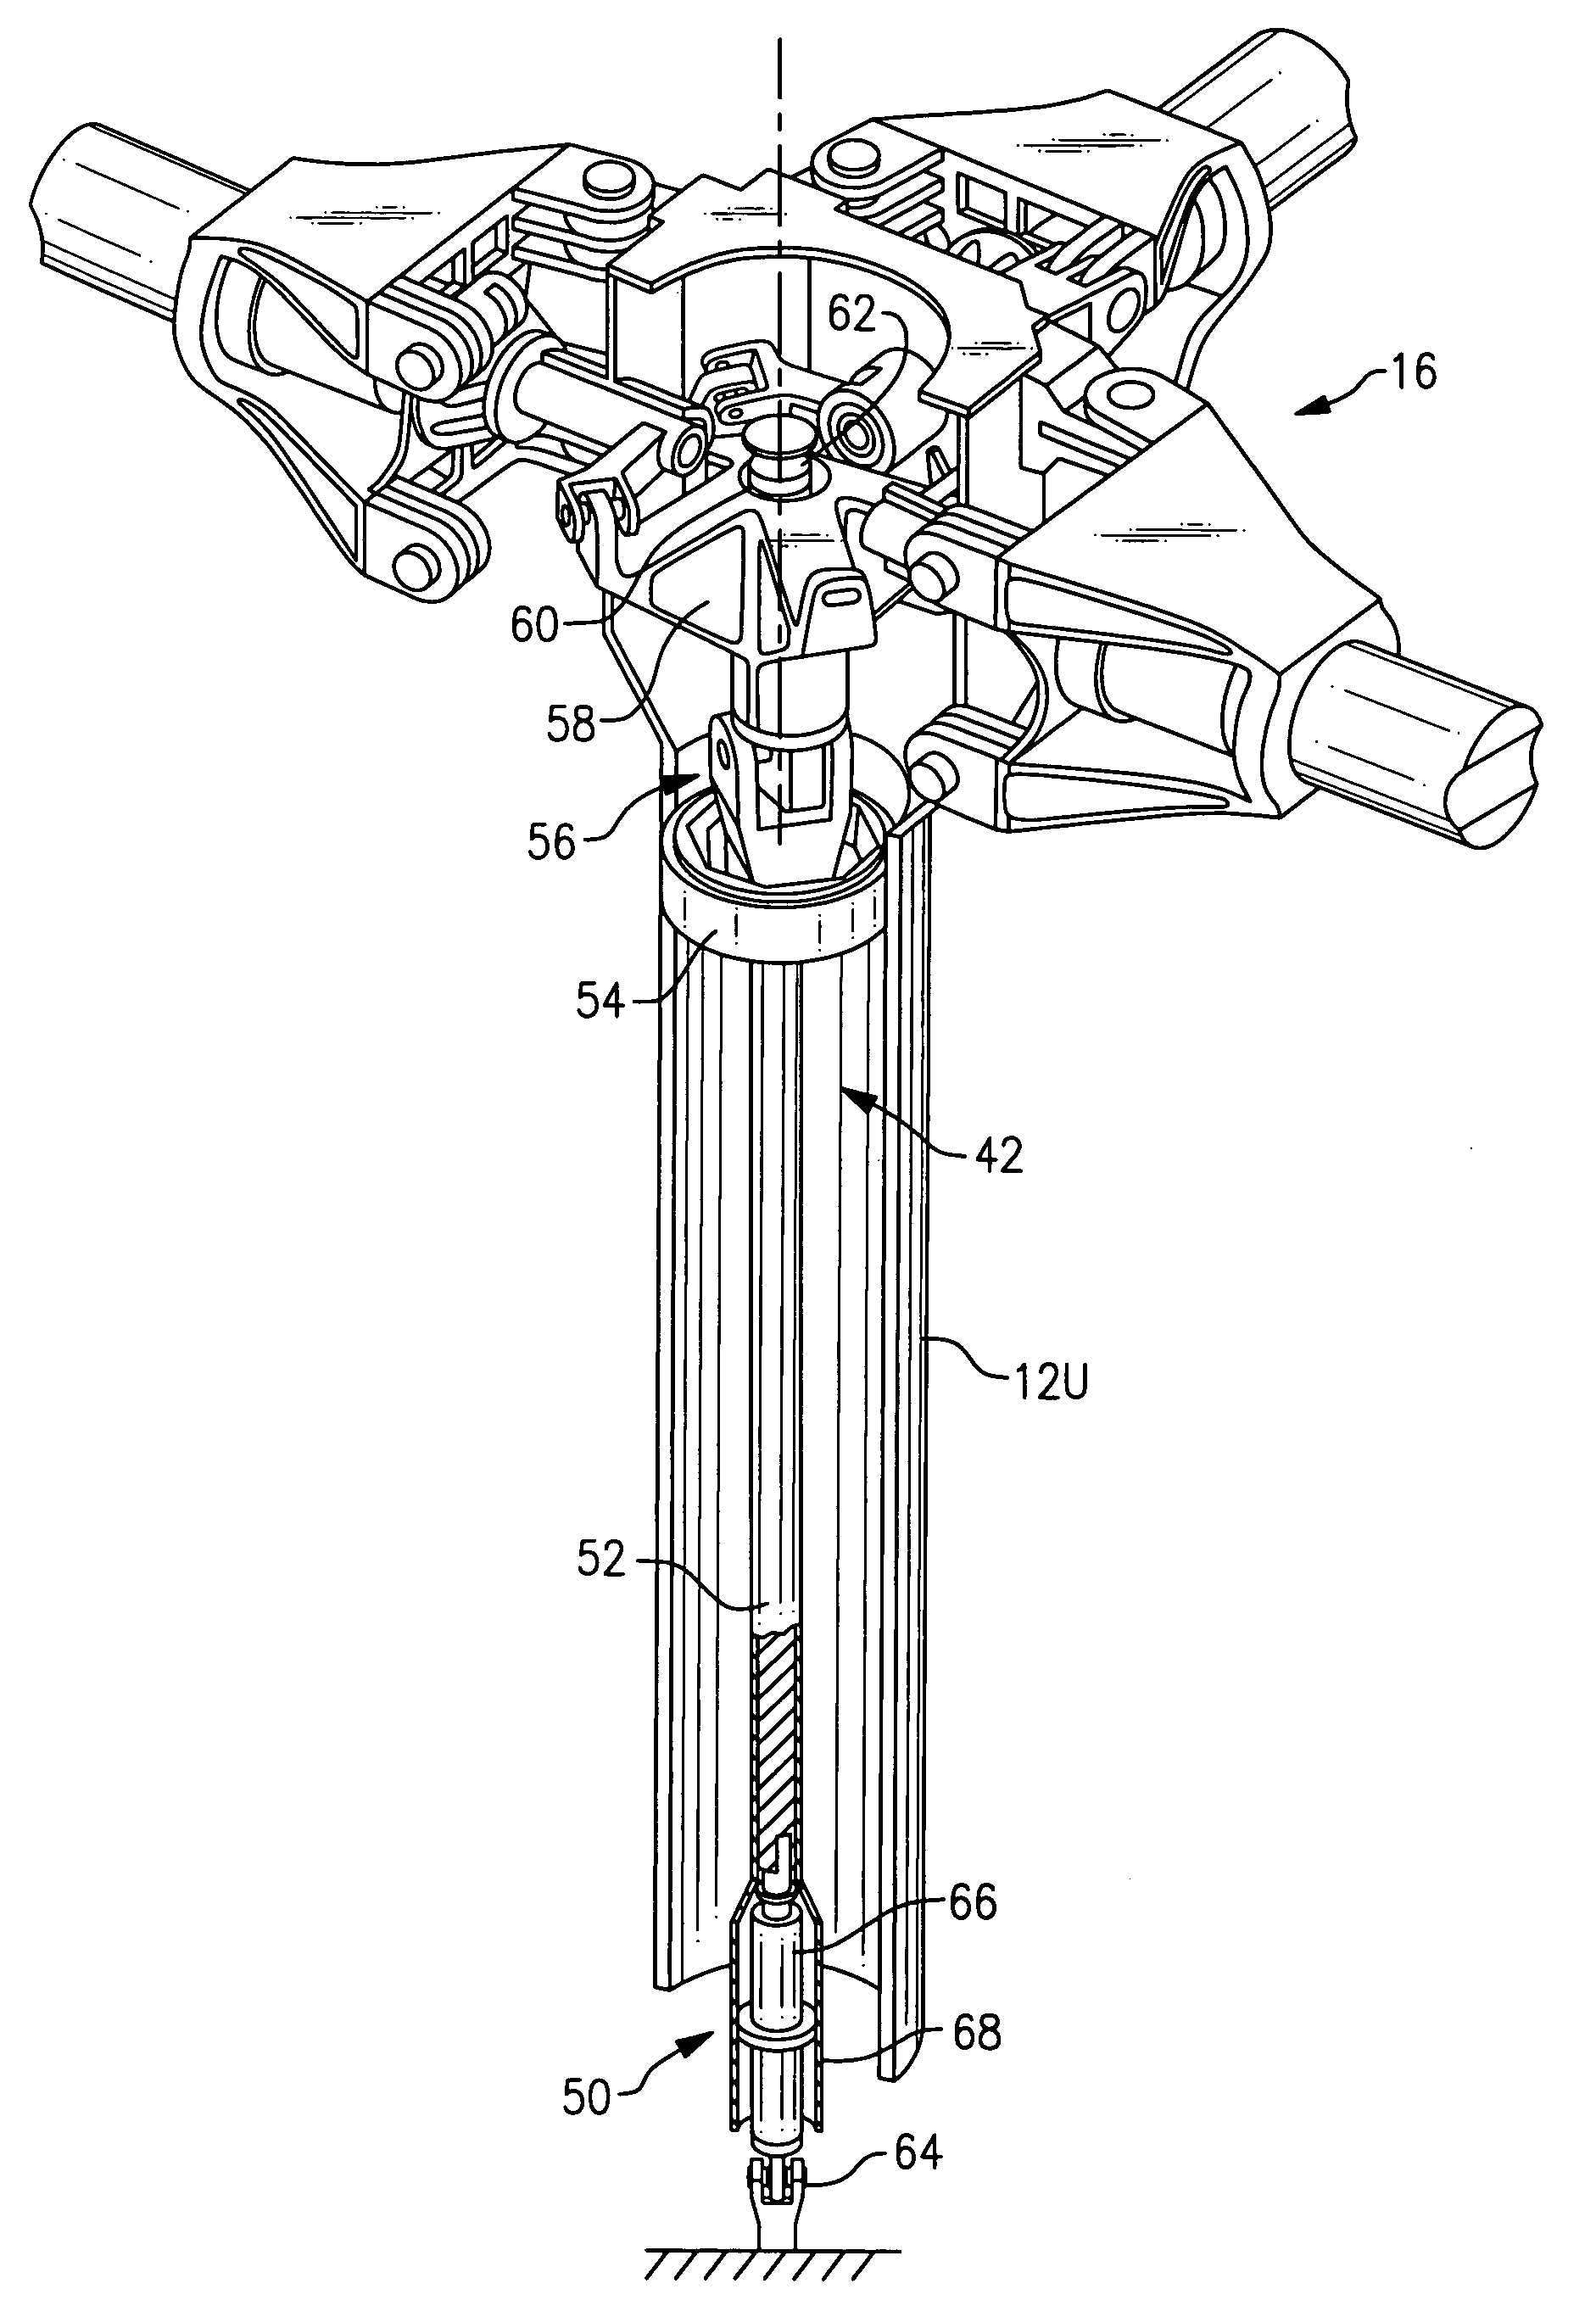 Upper rotor control system for a counter-rotating rotor system